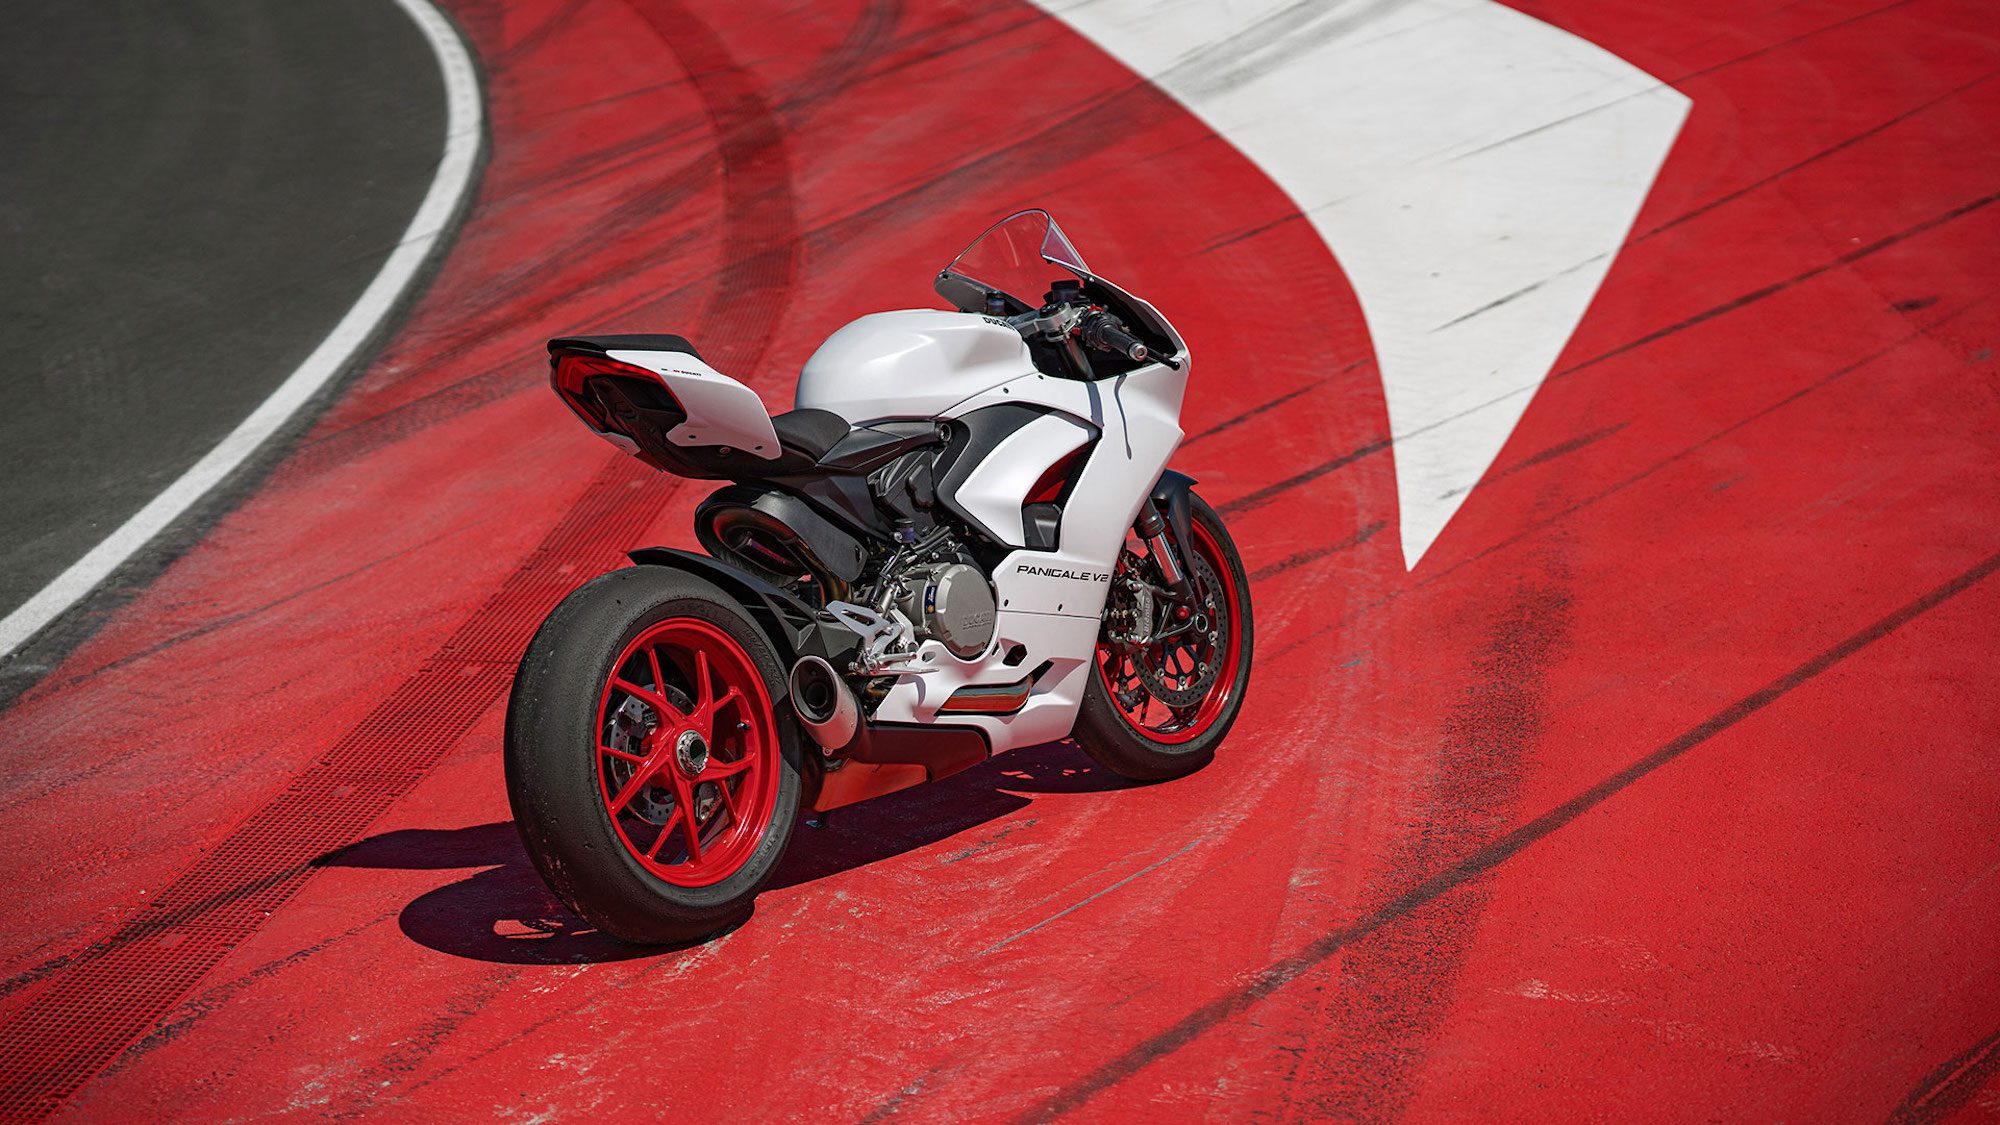 Ducati's Panigale V2. Media sourced from Moto Union.